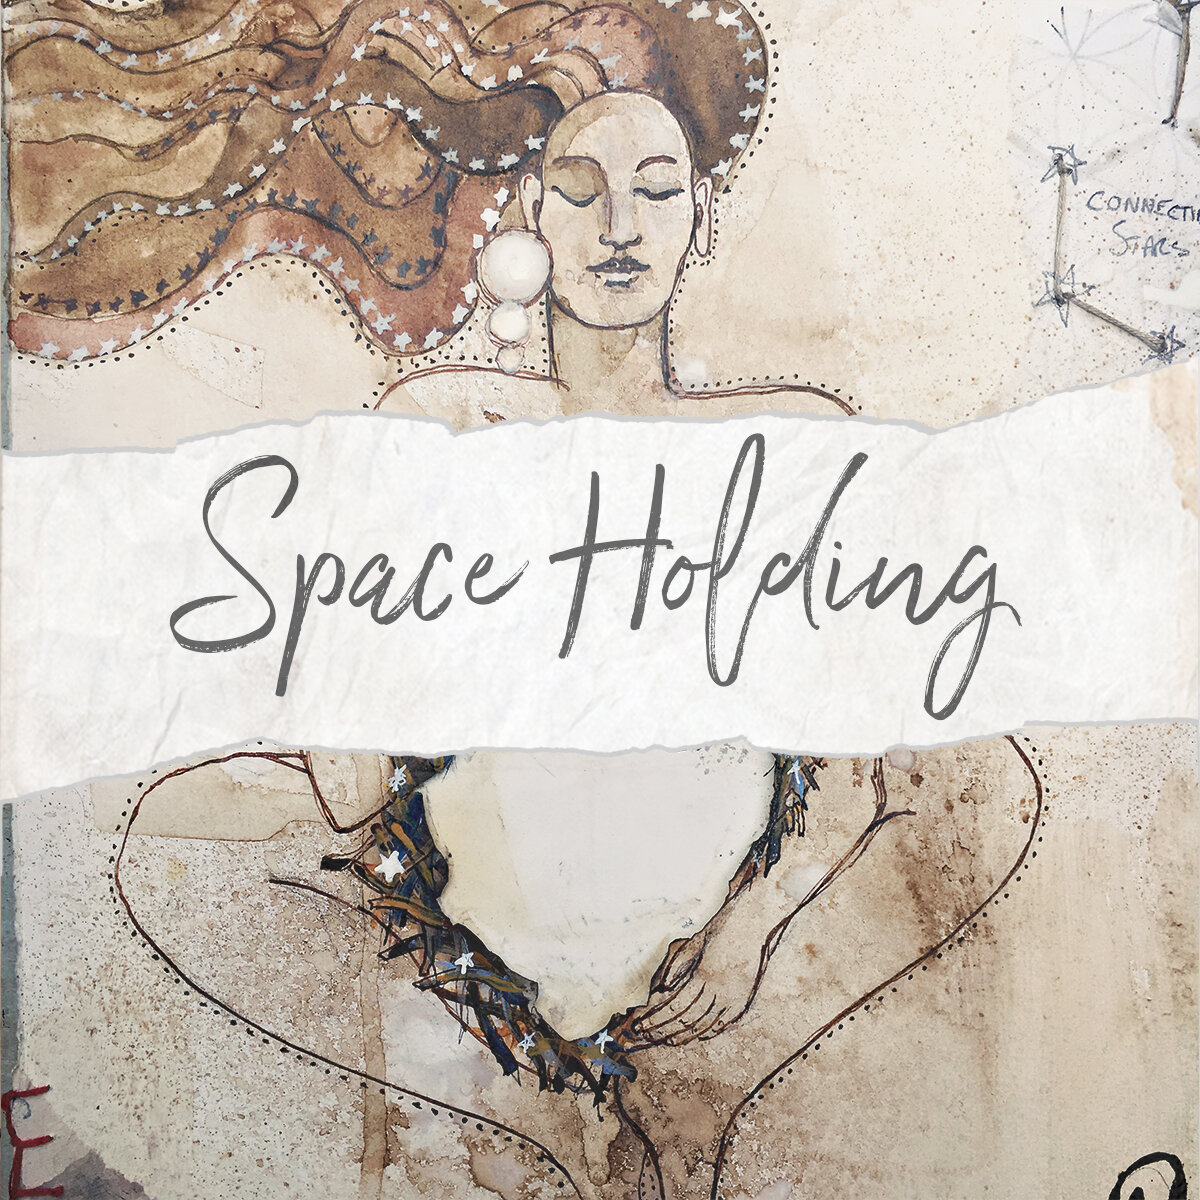 Space Holding